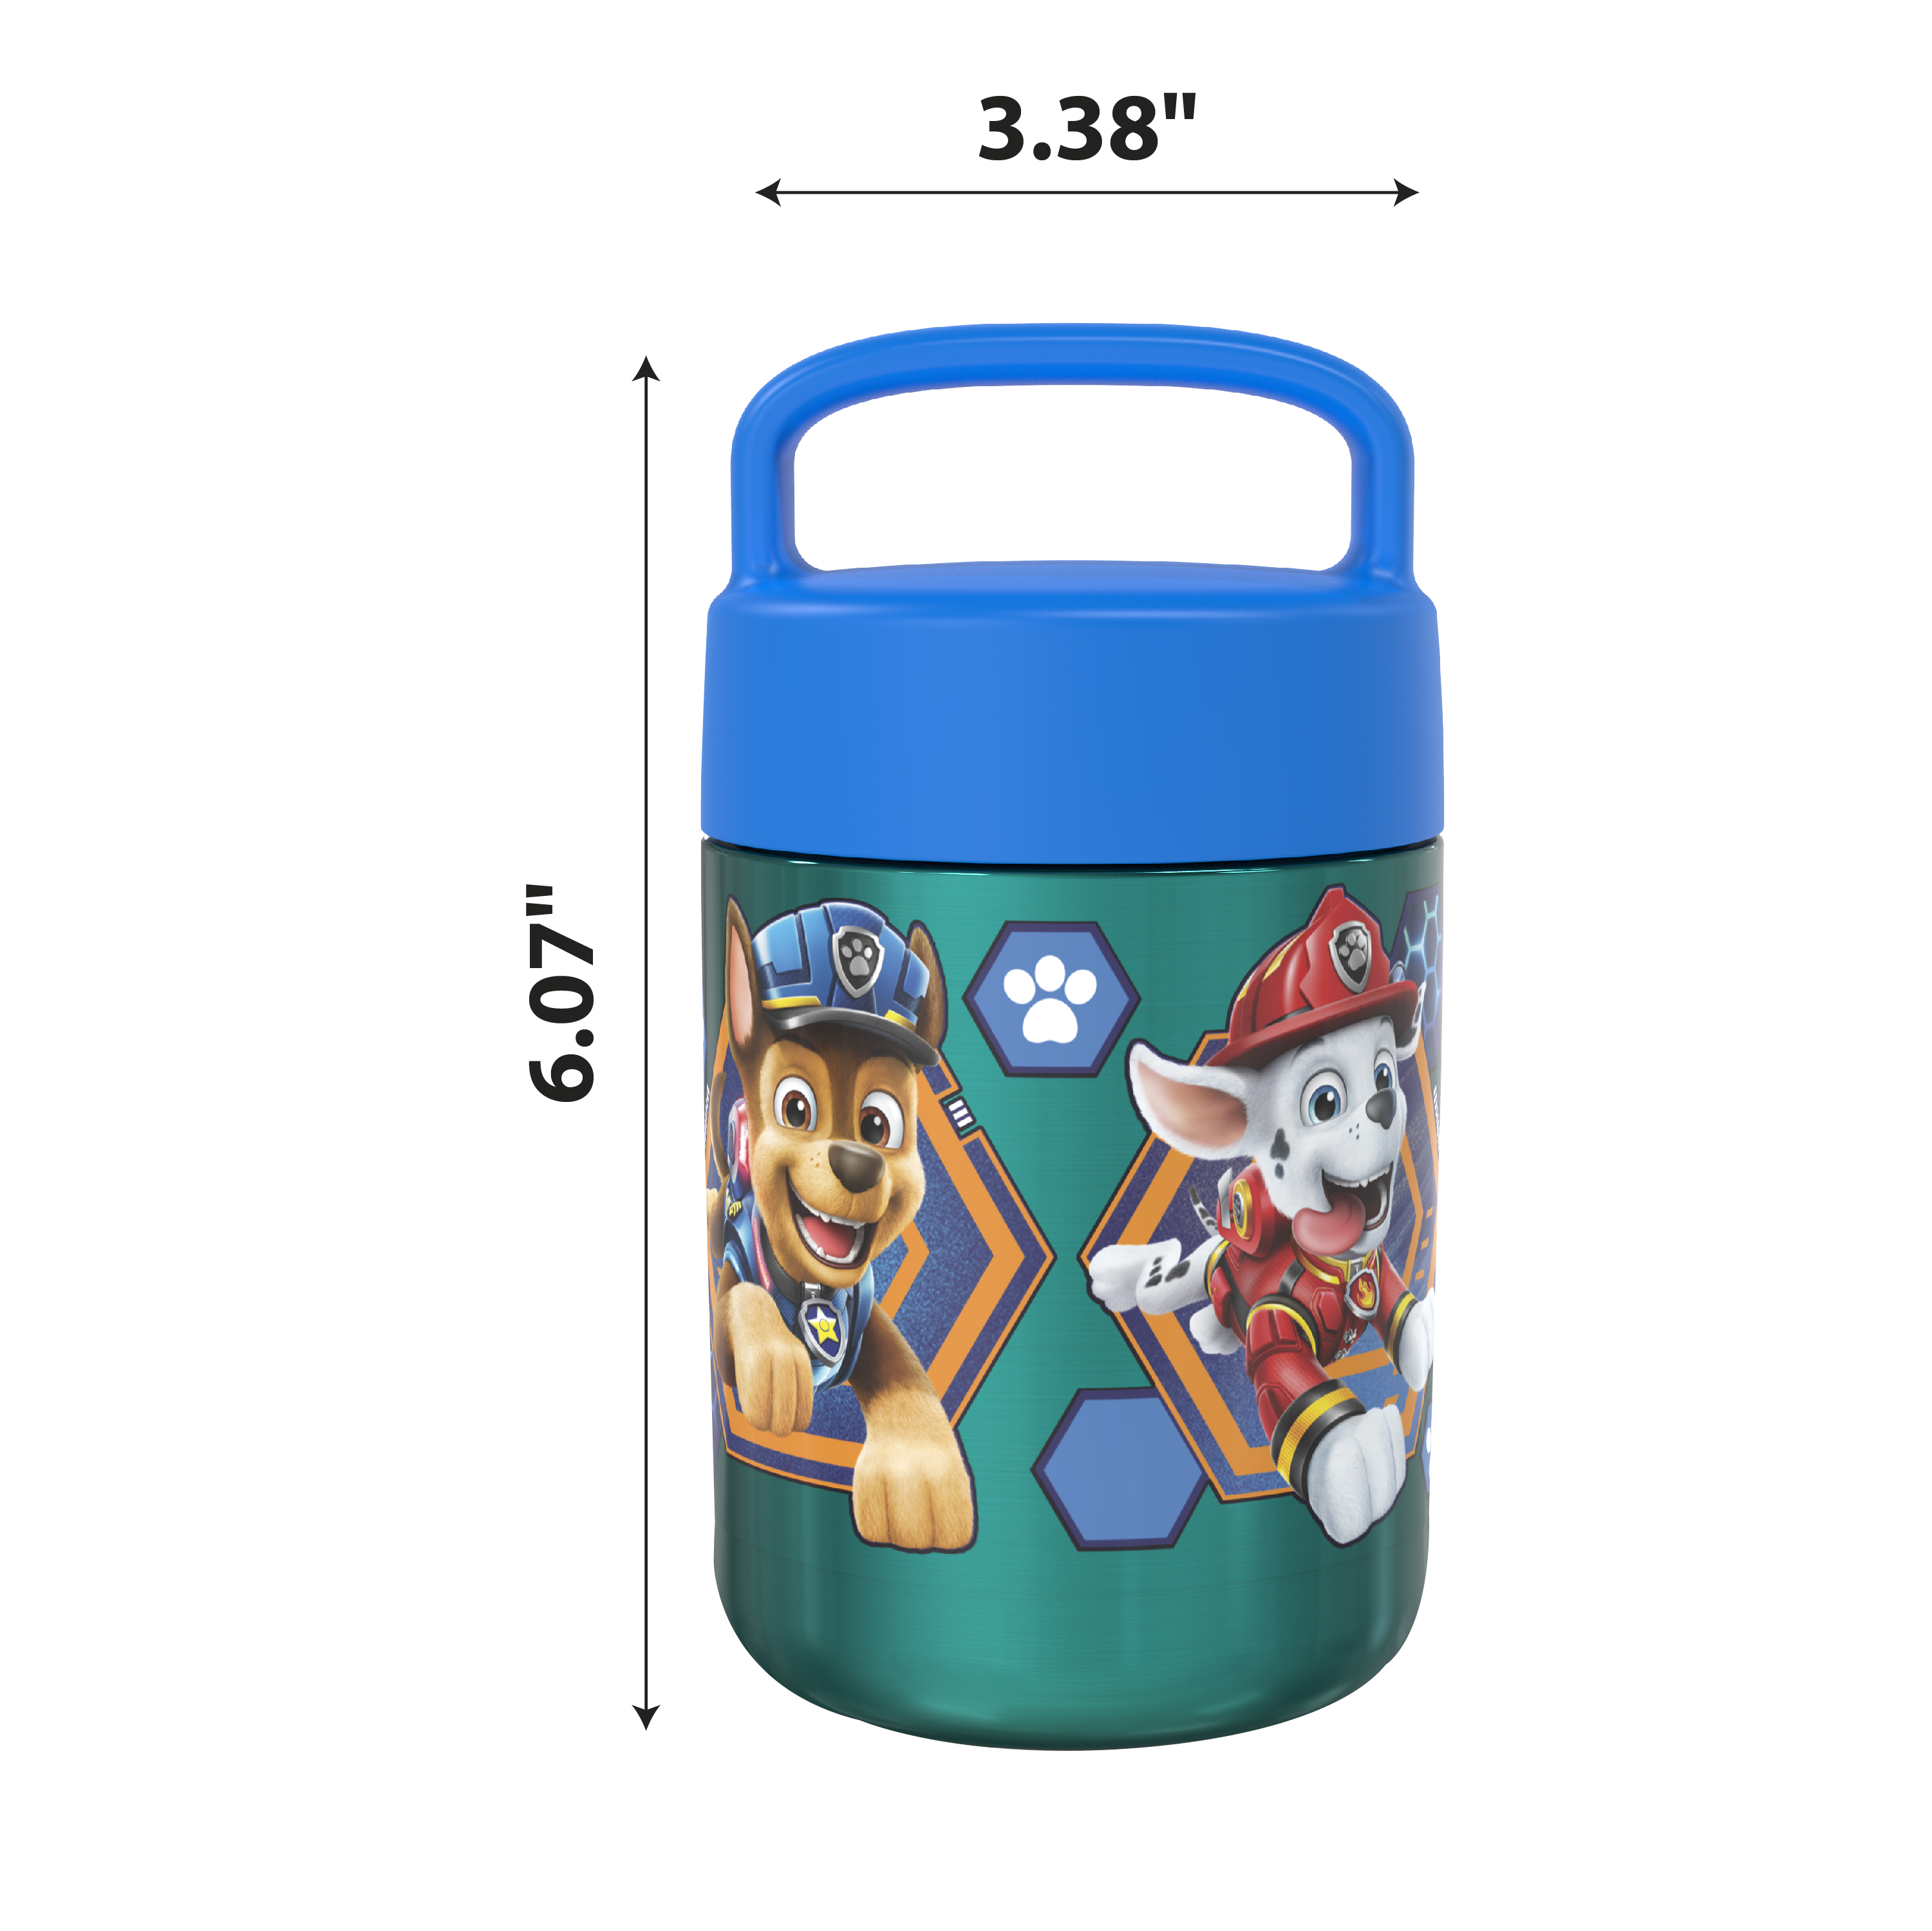 Paw Patrol Movie Reusable Vacuum Insulated Stainless Steel Food Container, Marshall, Chase and Friends slideshow image 10